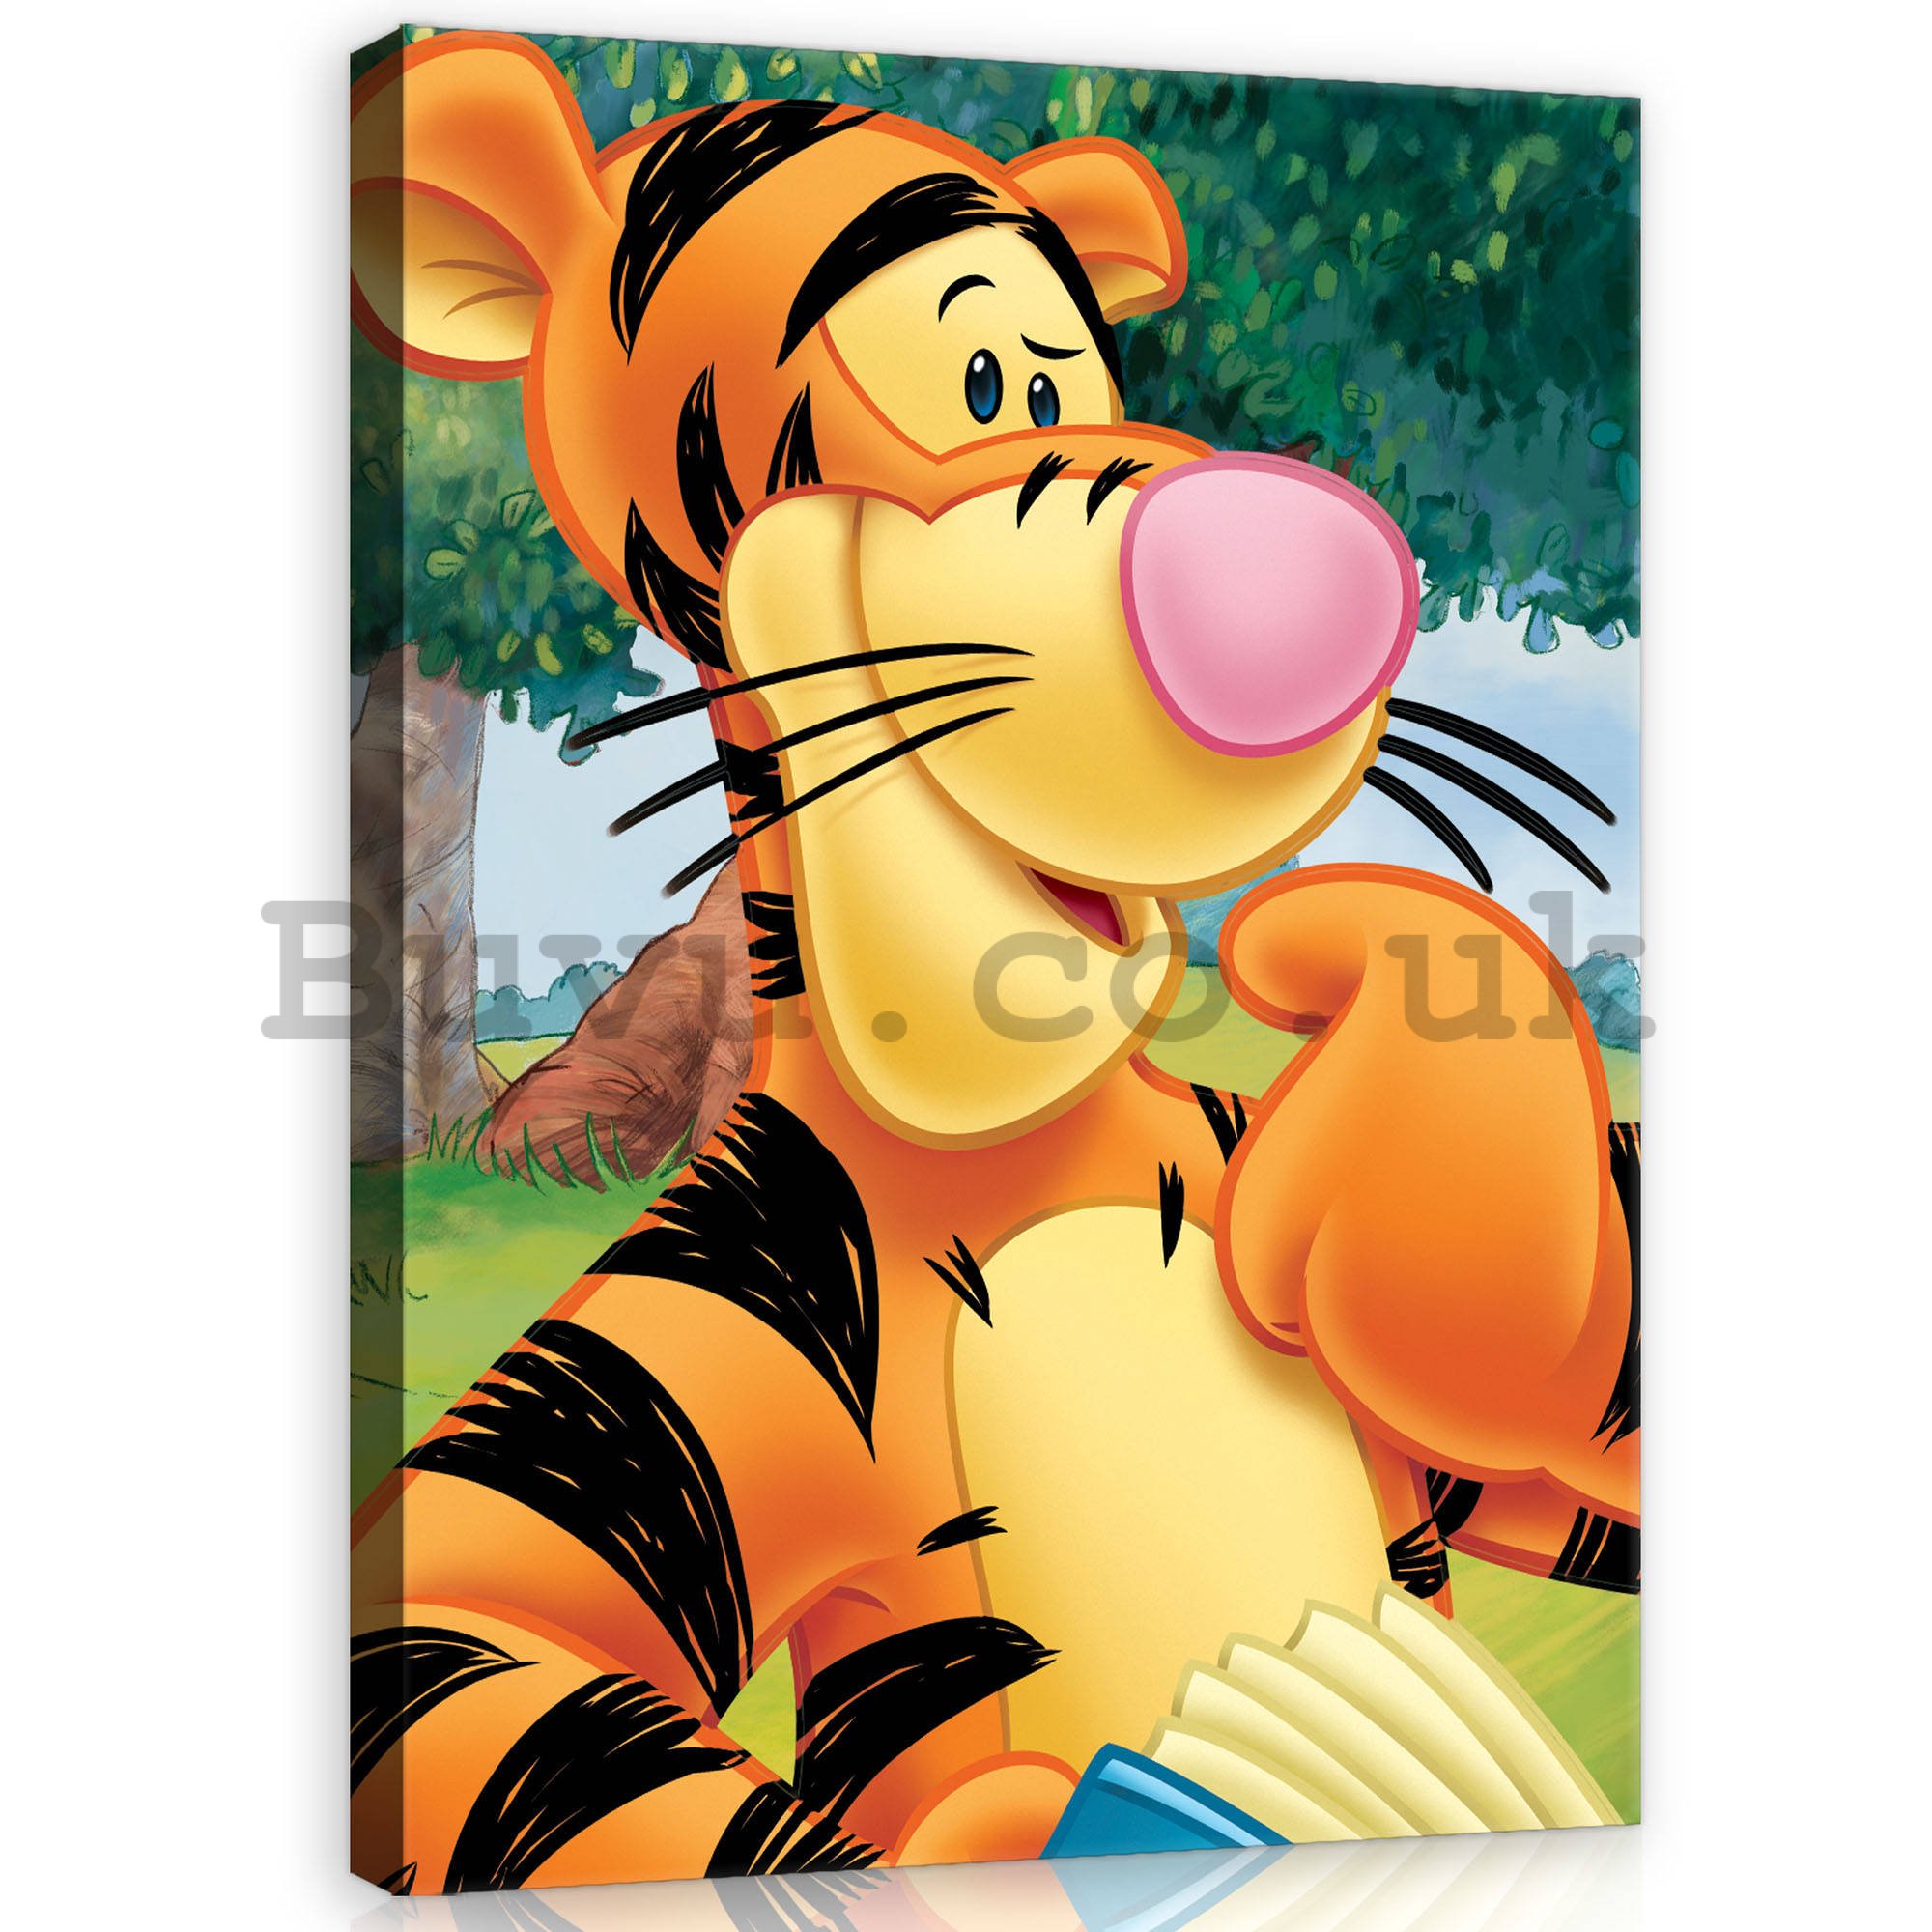 Painting on canvas: Winnie the Pooh (Tiger)  - 60x80 cm